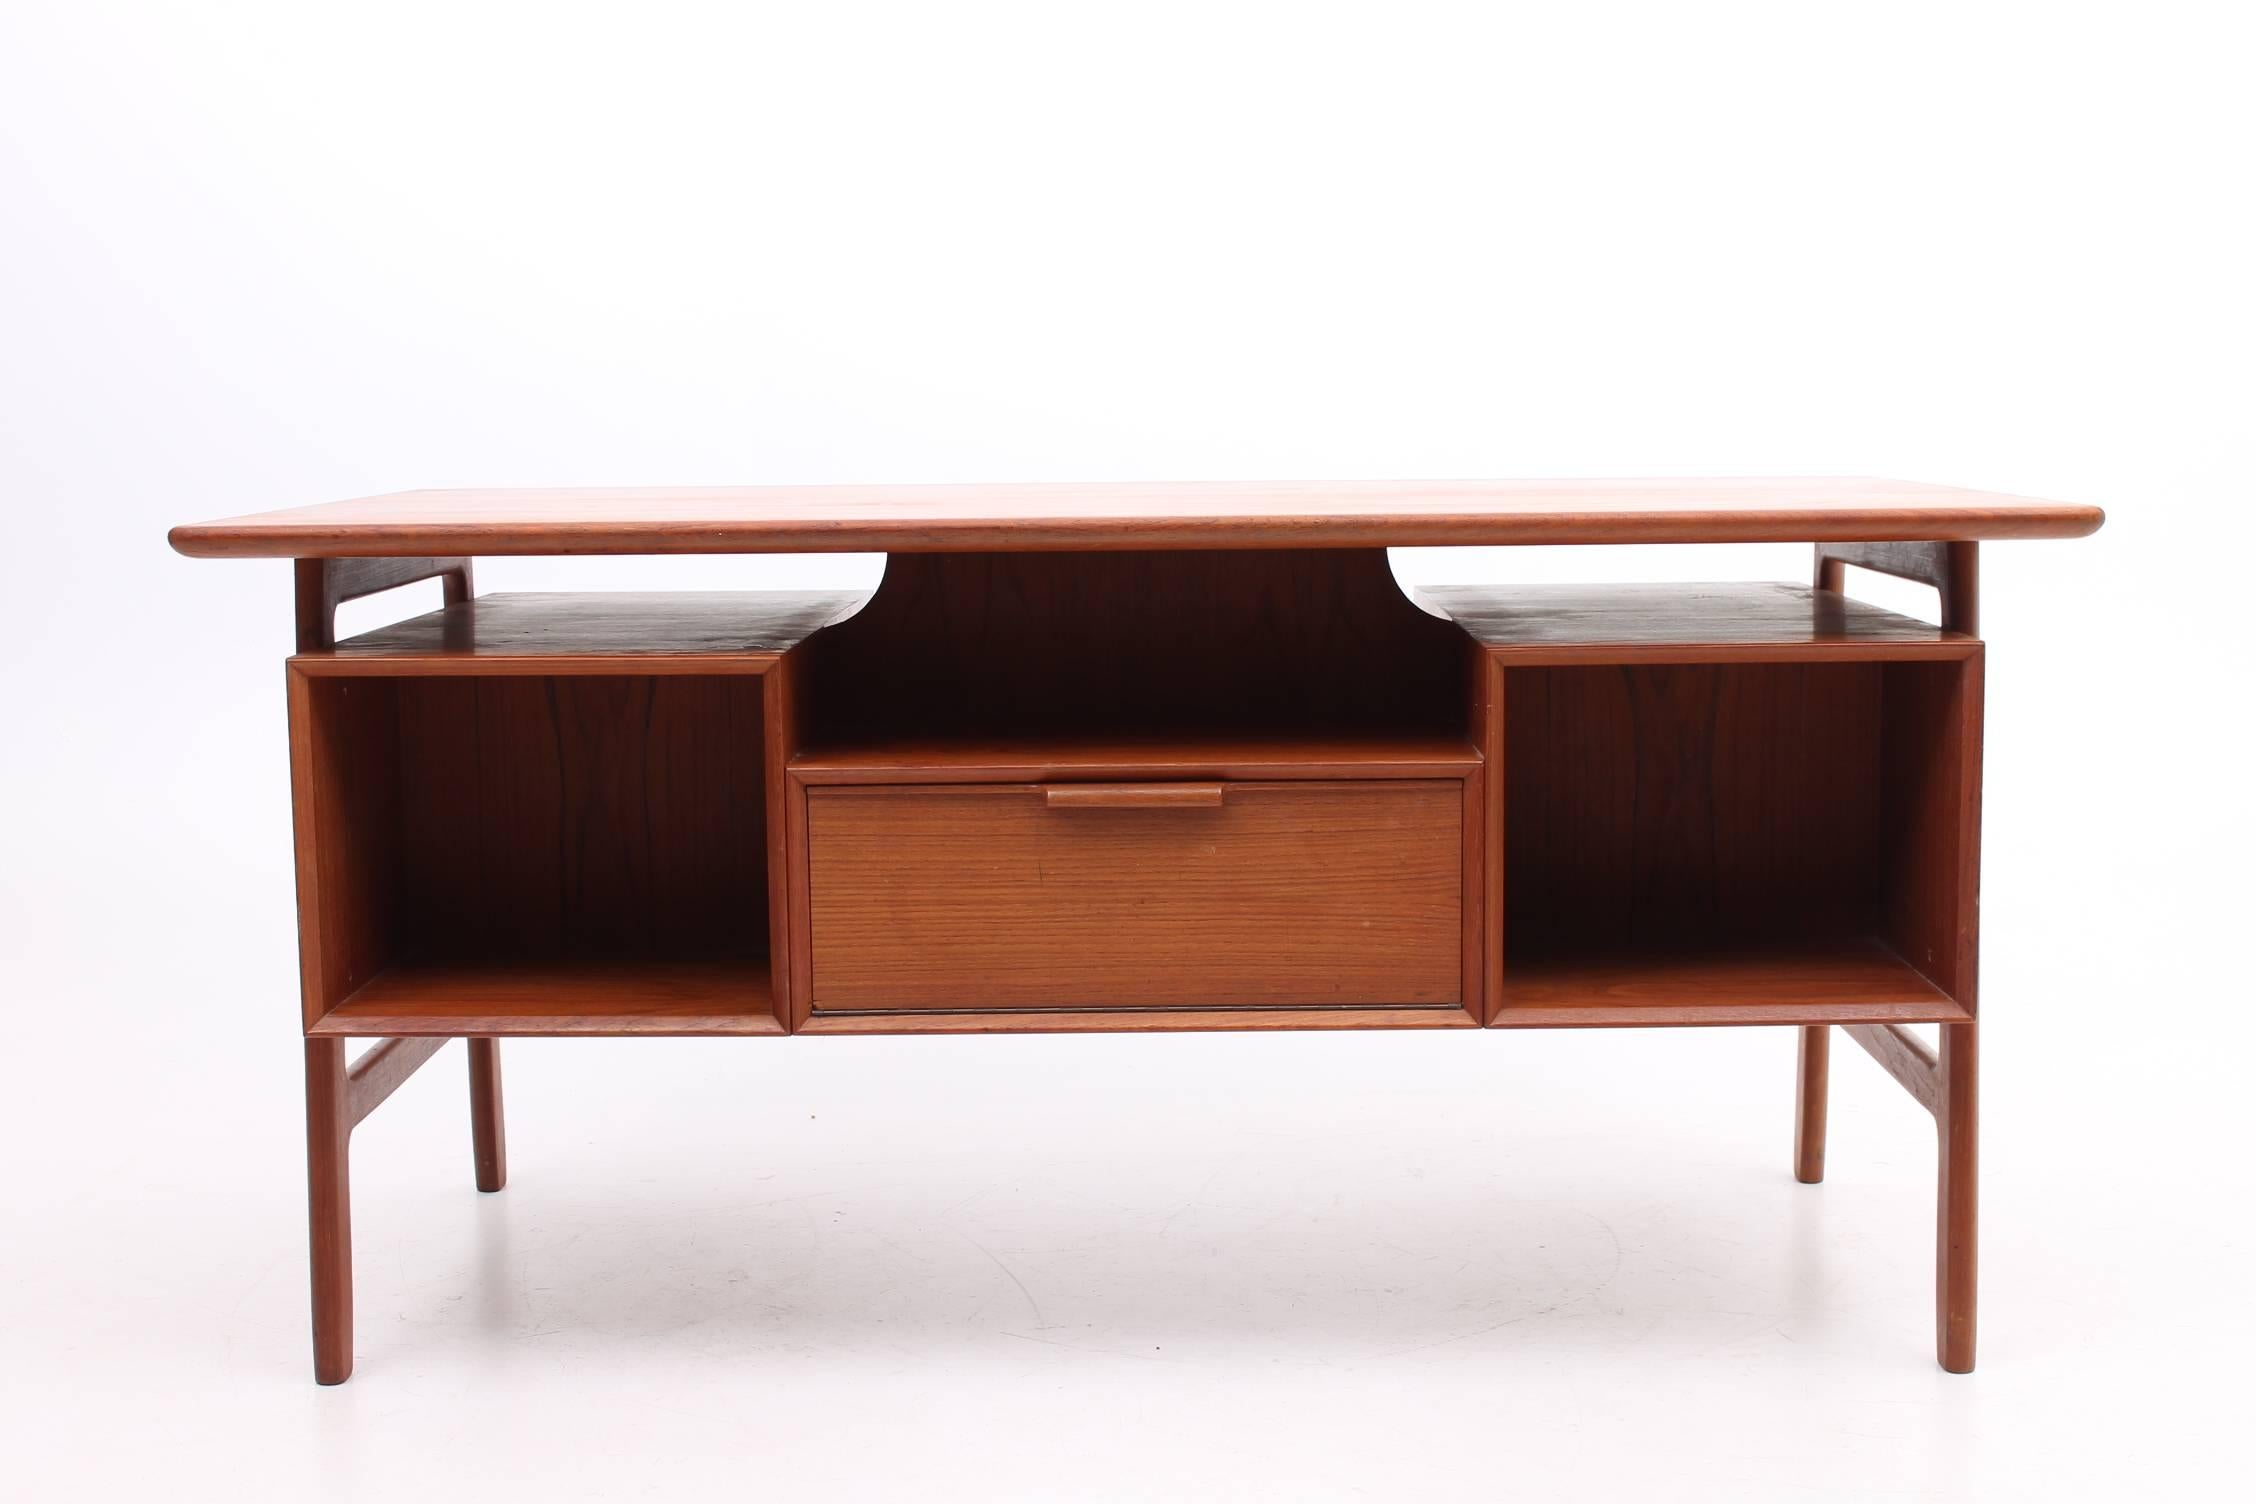 Beautiful desk made of teak designed by Gunni Omann for Omann Jun Møbelfabrik. This desk is from the model 75 series. The desk features a desk top that floats over the base. The base has three drawers on either side of the chair opening and open